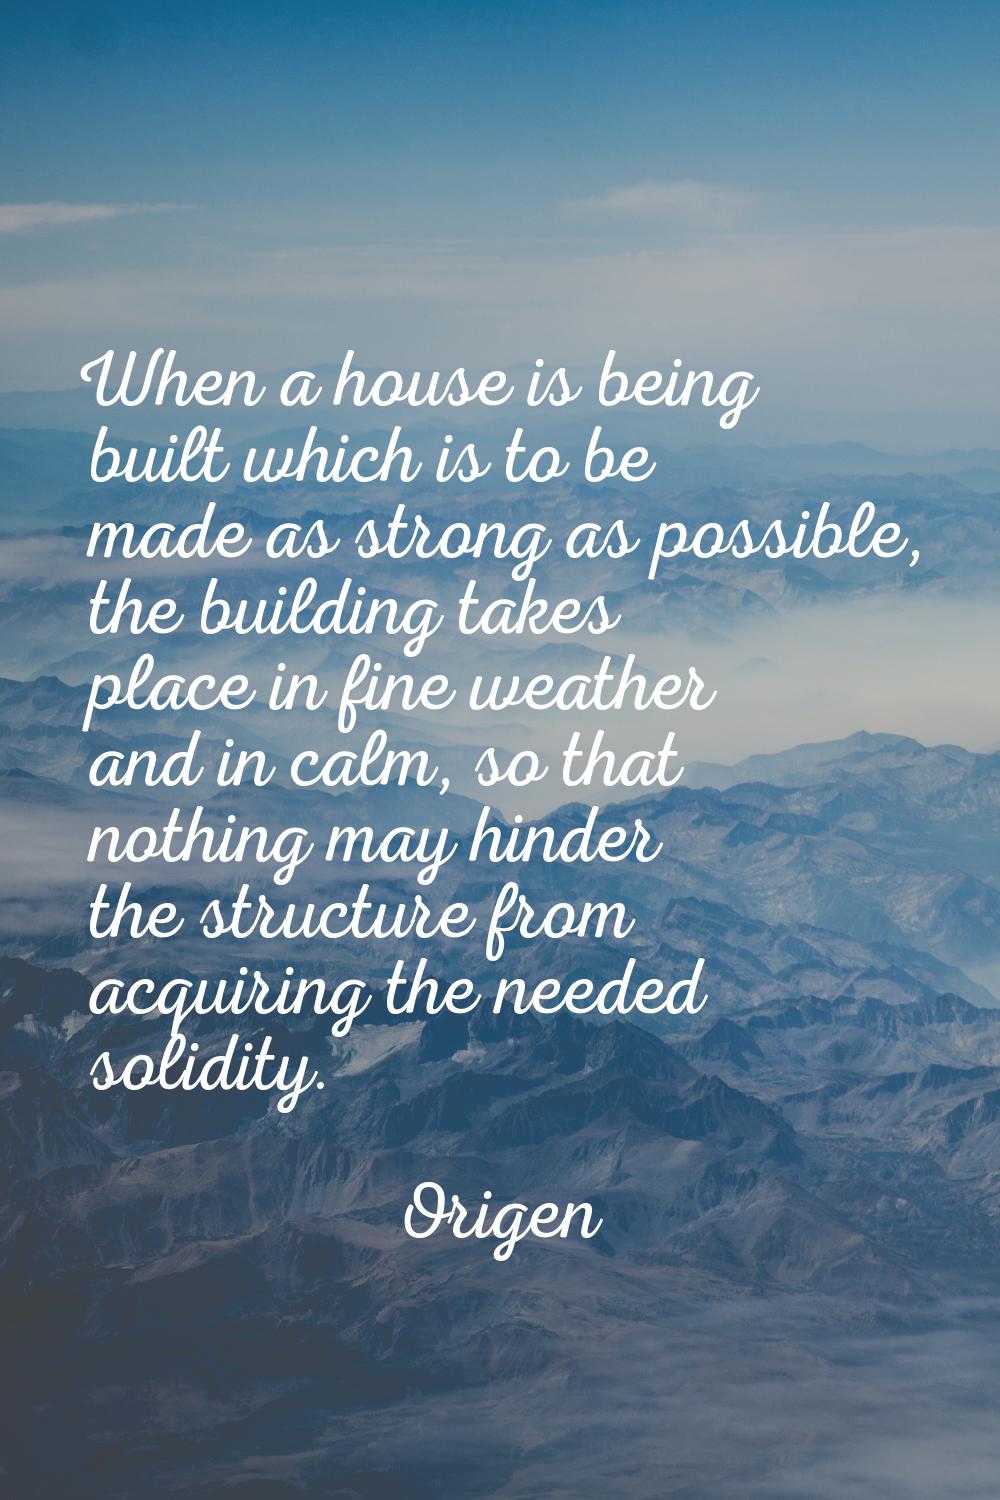 When a house is being built which is to be made as strong as possible, the building takes place in 